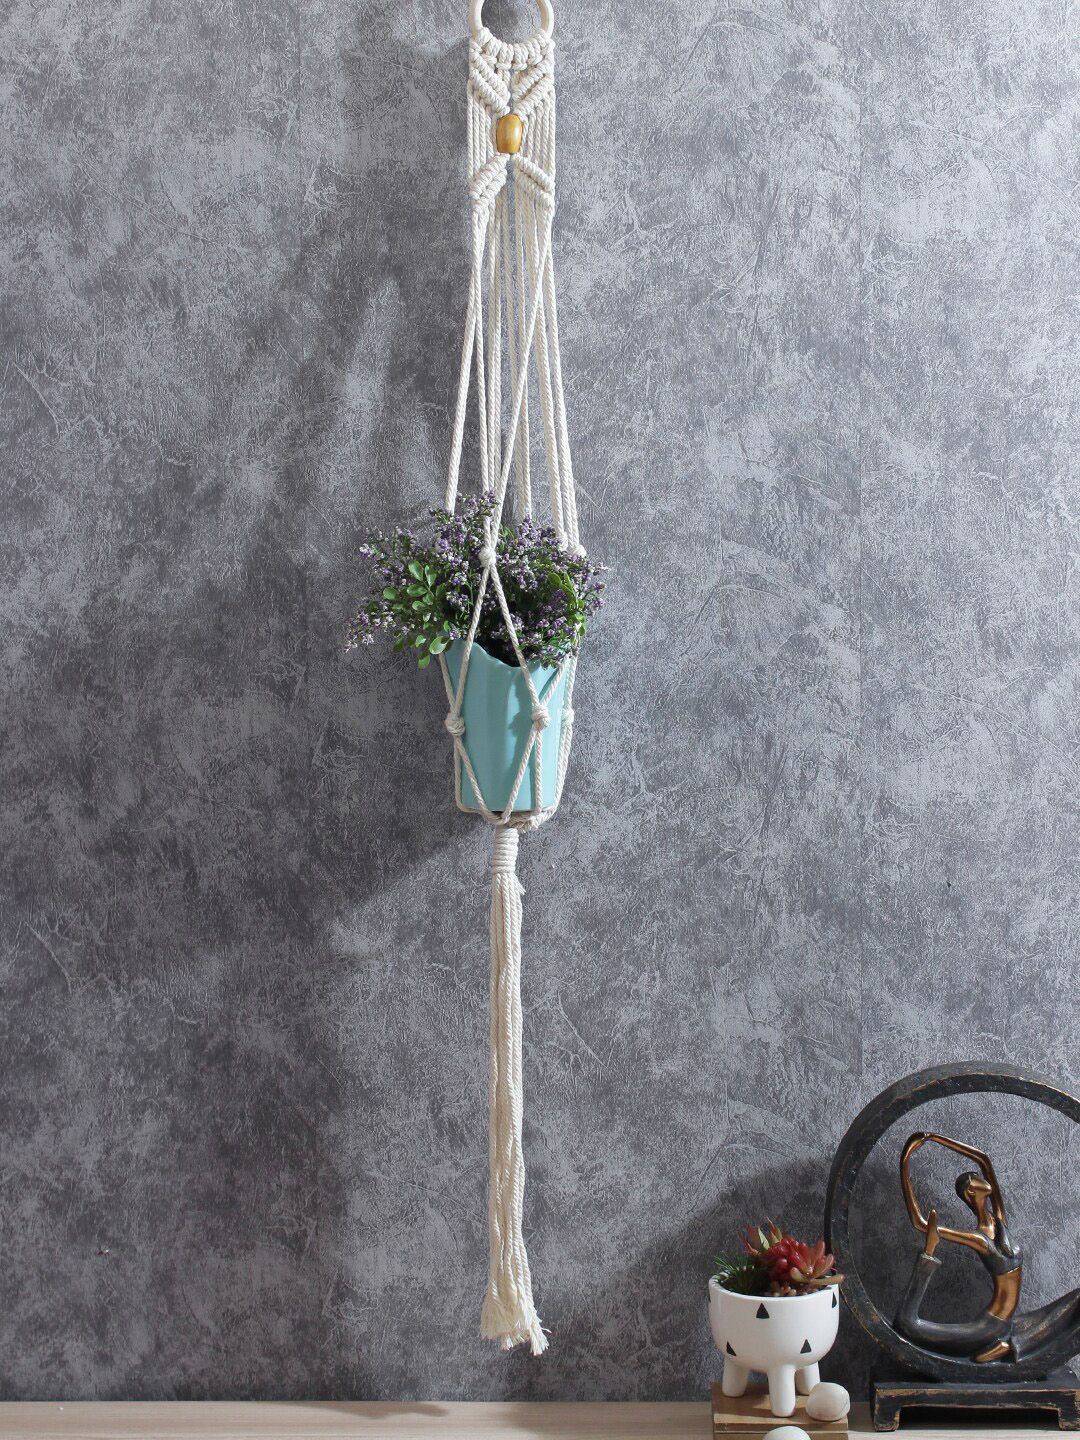 Aapno Rajasthan White Hand-Knotted Hanging Planter Price in India